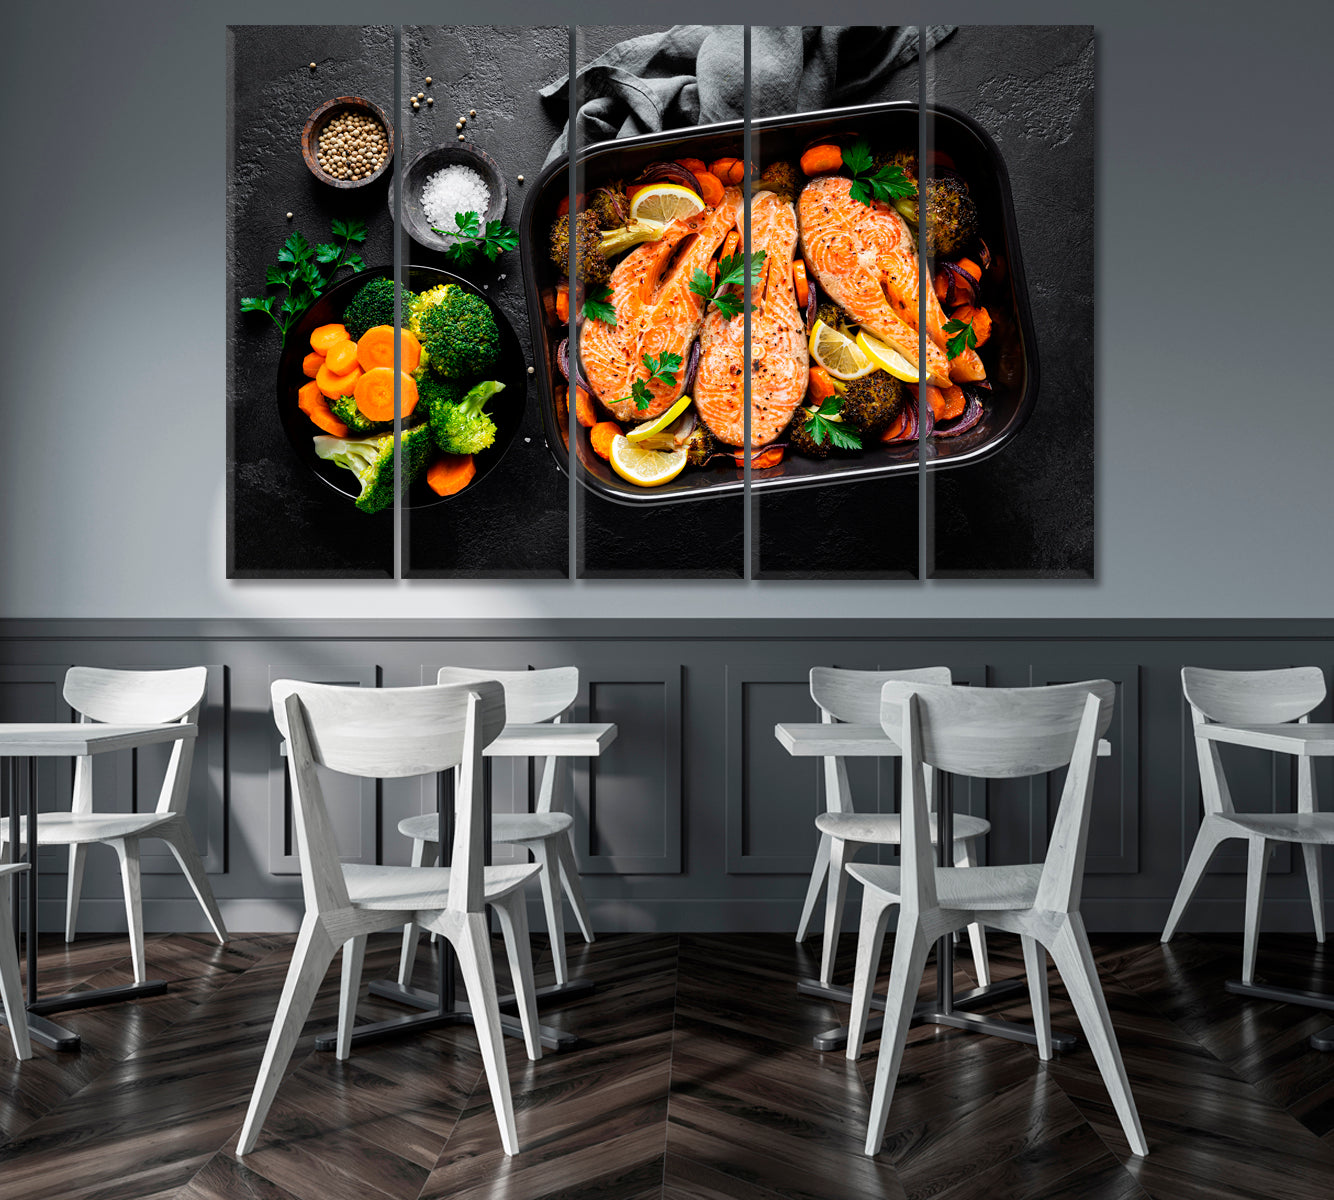 Baked Salmon Fish with Vegetables Canvas Print ArtLexy 5 Panels 36"x24" inches 